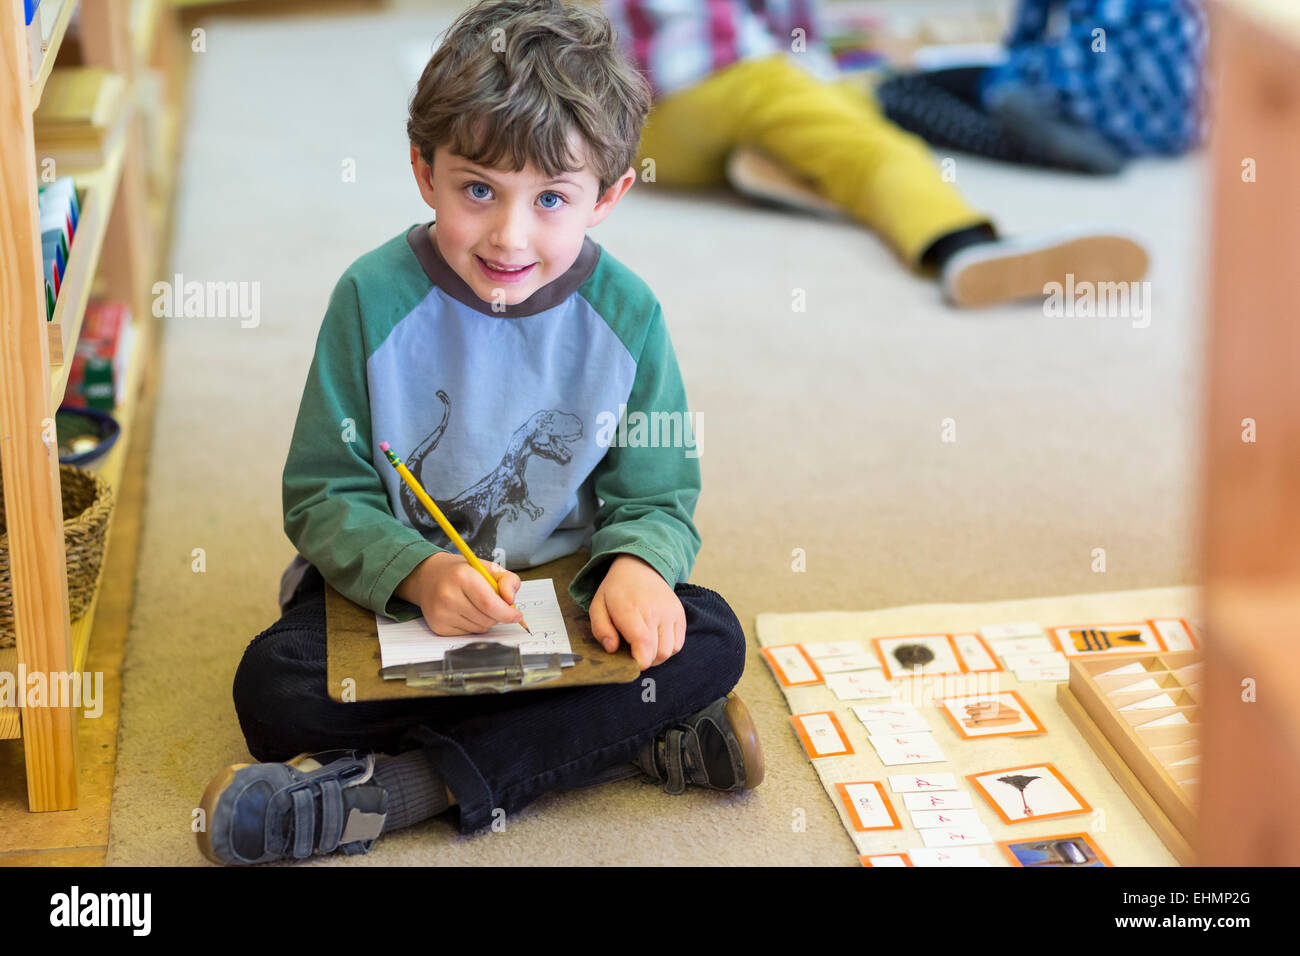 Smiling boy writing in classroom Banque D'Images